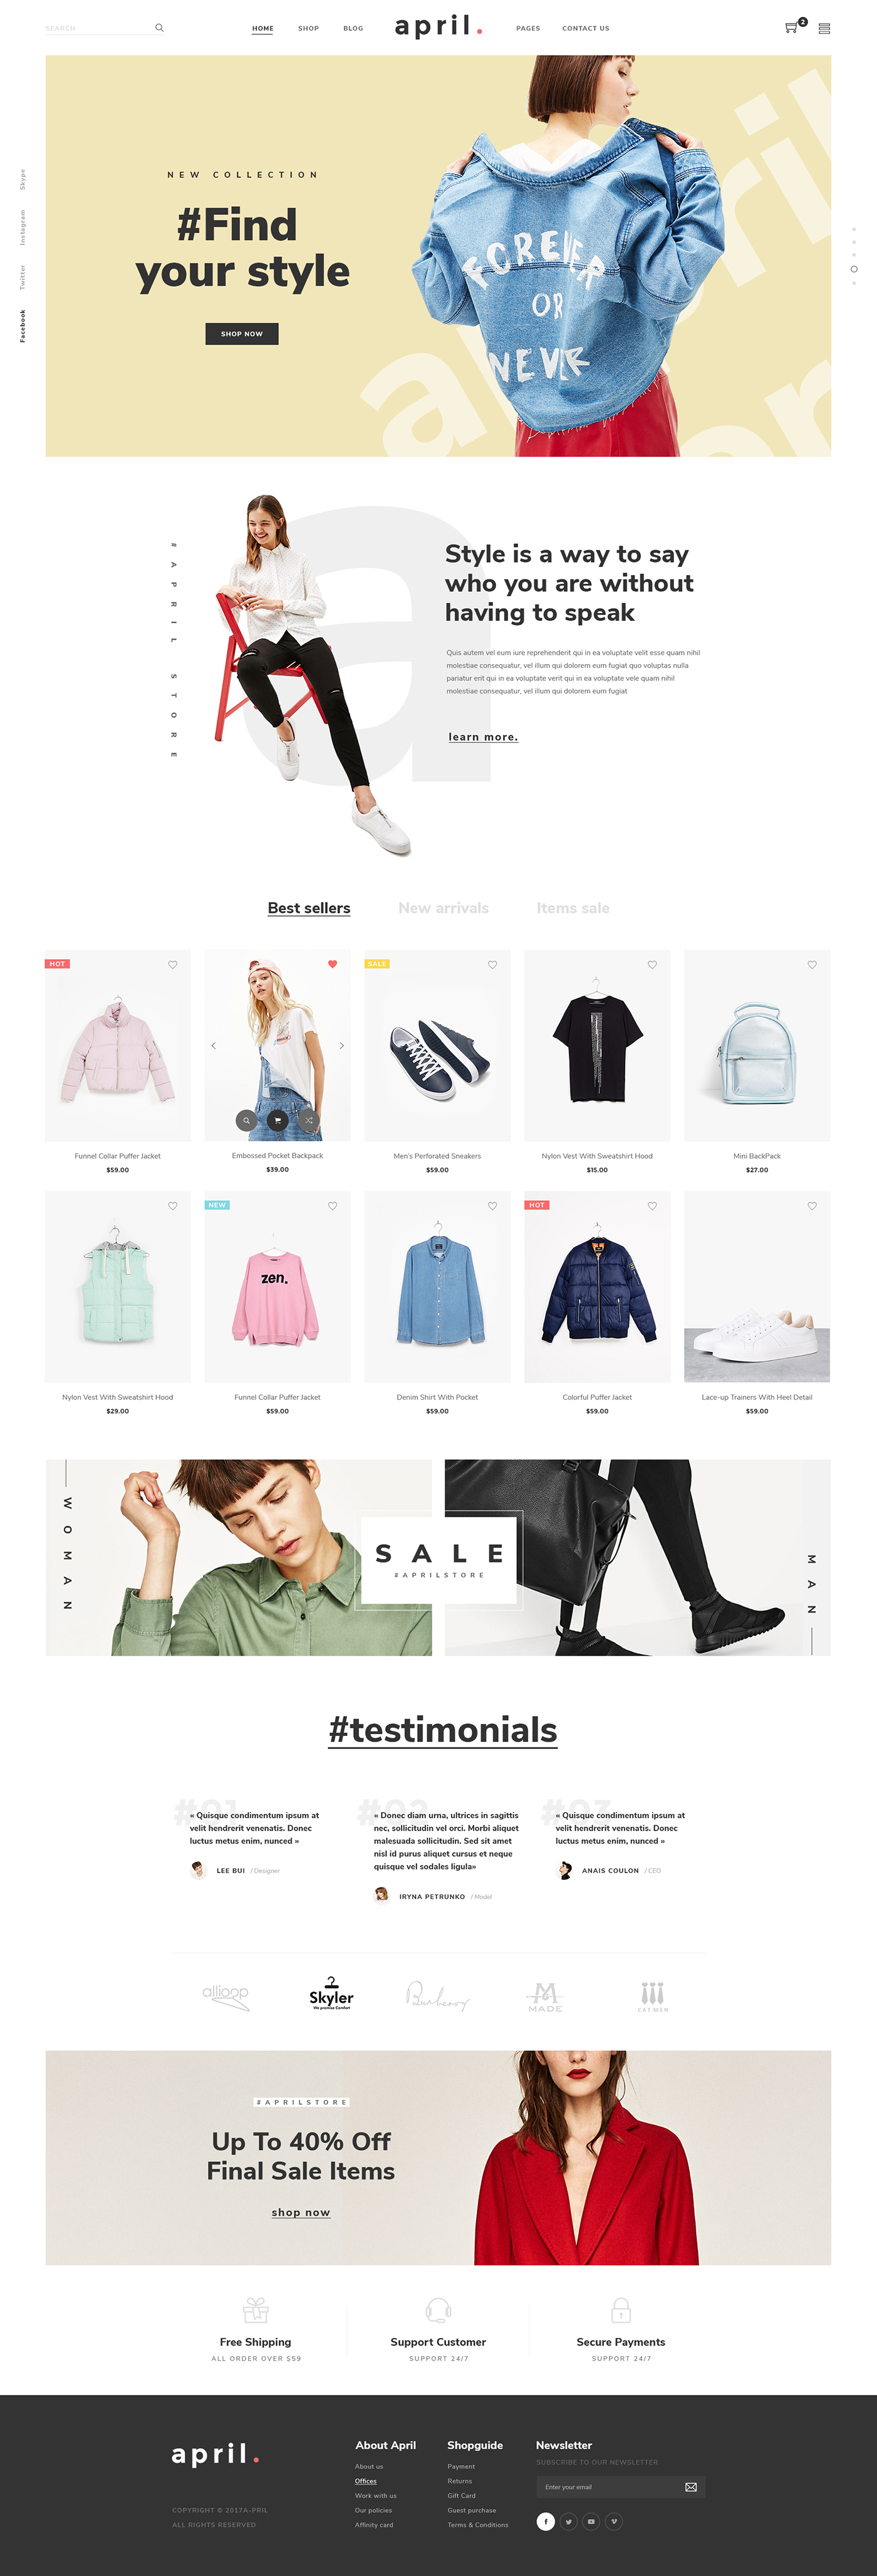 April - Ecommerce PSD Template on Behance